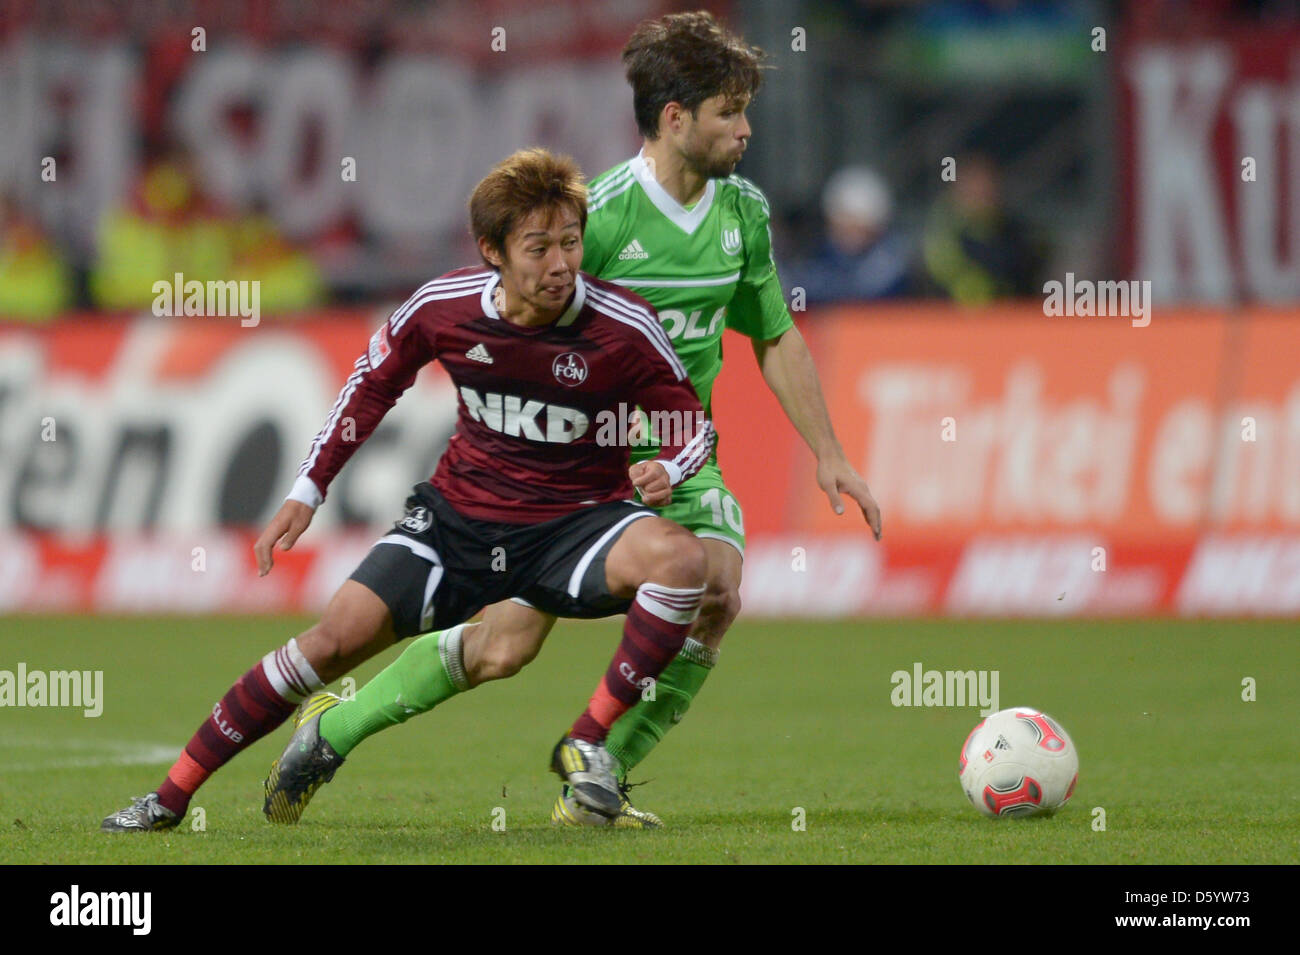 Wolfsburg's Diego (r) tackles Nuremberg's  Hiroshi Kiyotake (l) during a German Bundesliga match between 1 FC Nuremberg and VfL Wolfsburg at easyCredit stadium in Nuermberg, Germany, 3 November 2012. Photo: DAVID EBENER    (ATTENTION: EMBARGO CONDITIONS! The DFL permits the further utilisation of up to 15 pictures only (no sequntial pictures or video-similar series of pictures allo Stock Photo